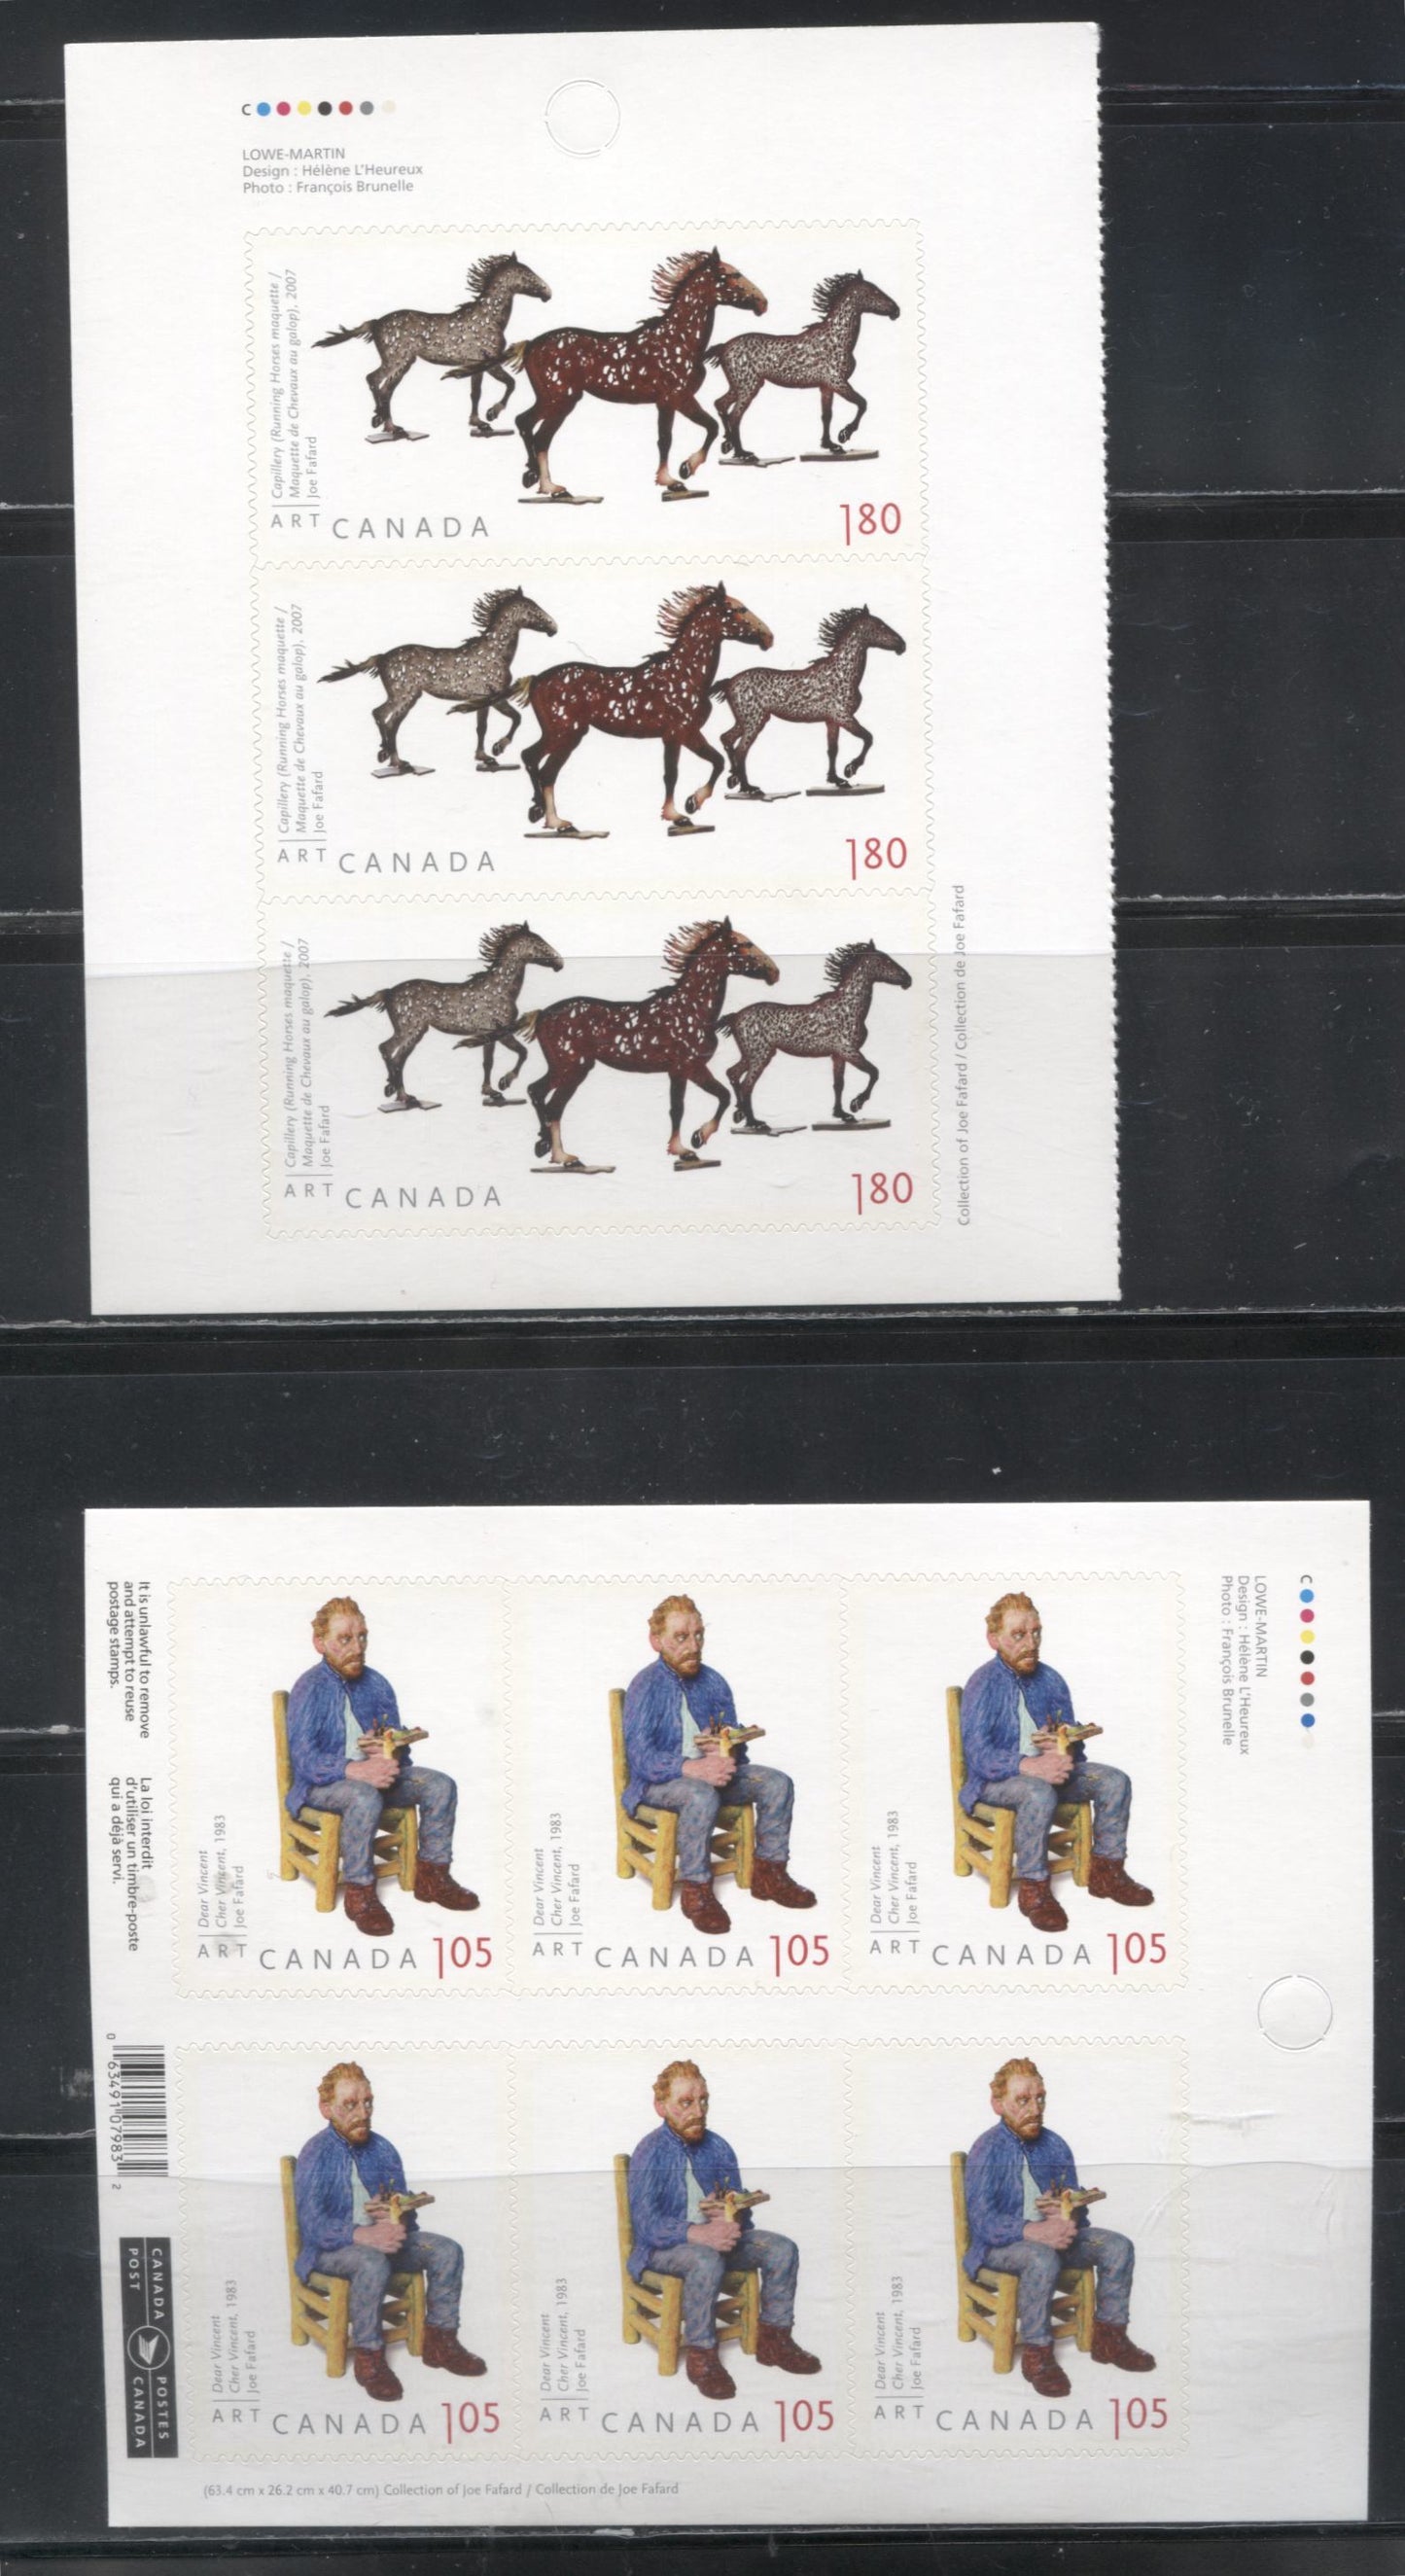 Lot 73 Canada #2524-2525 2012 Joe Fafard Issue, VFNH Booklet Panes of 6 and 3 on LF TRC Paper, Only 200,000 Booklets Issued